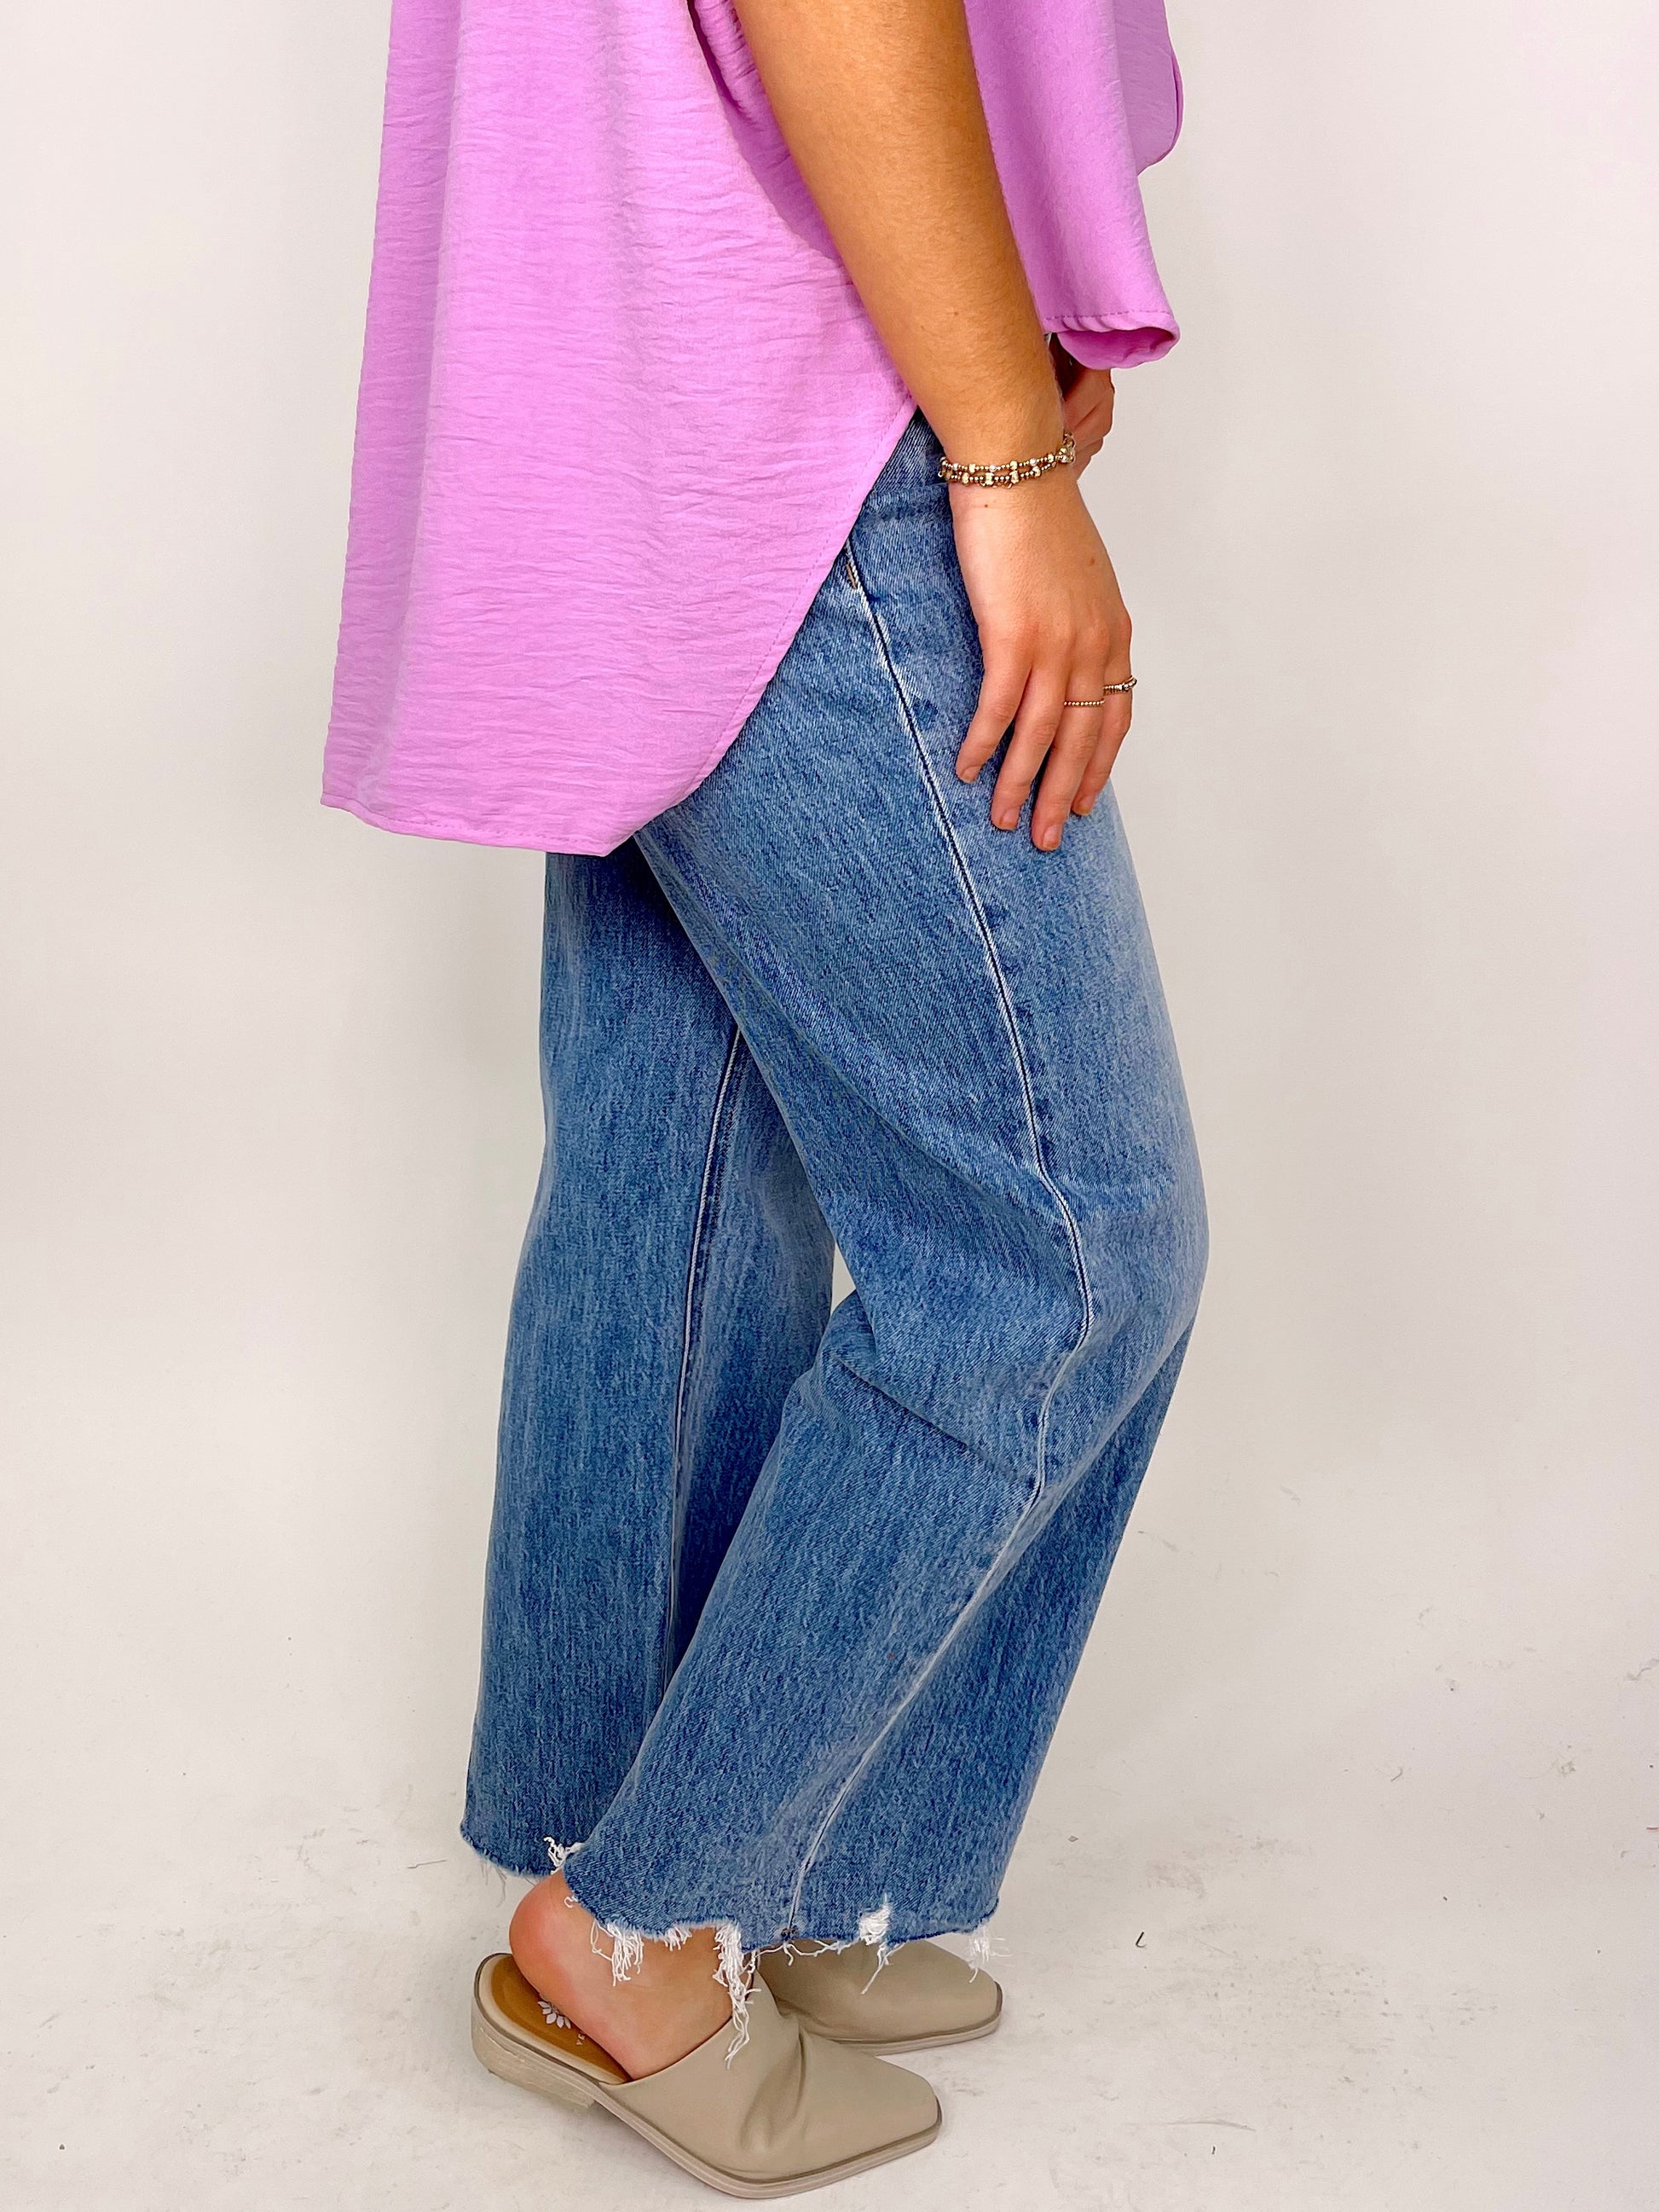 The Magnolia Crop Wide Leg Jean-Jeans-Vervet-The Village Shoppe, Women’s Fashion Boutique, Shop Online and In Store - Located in Muscle Shoals, AL.